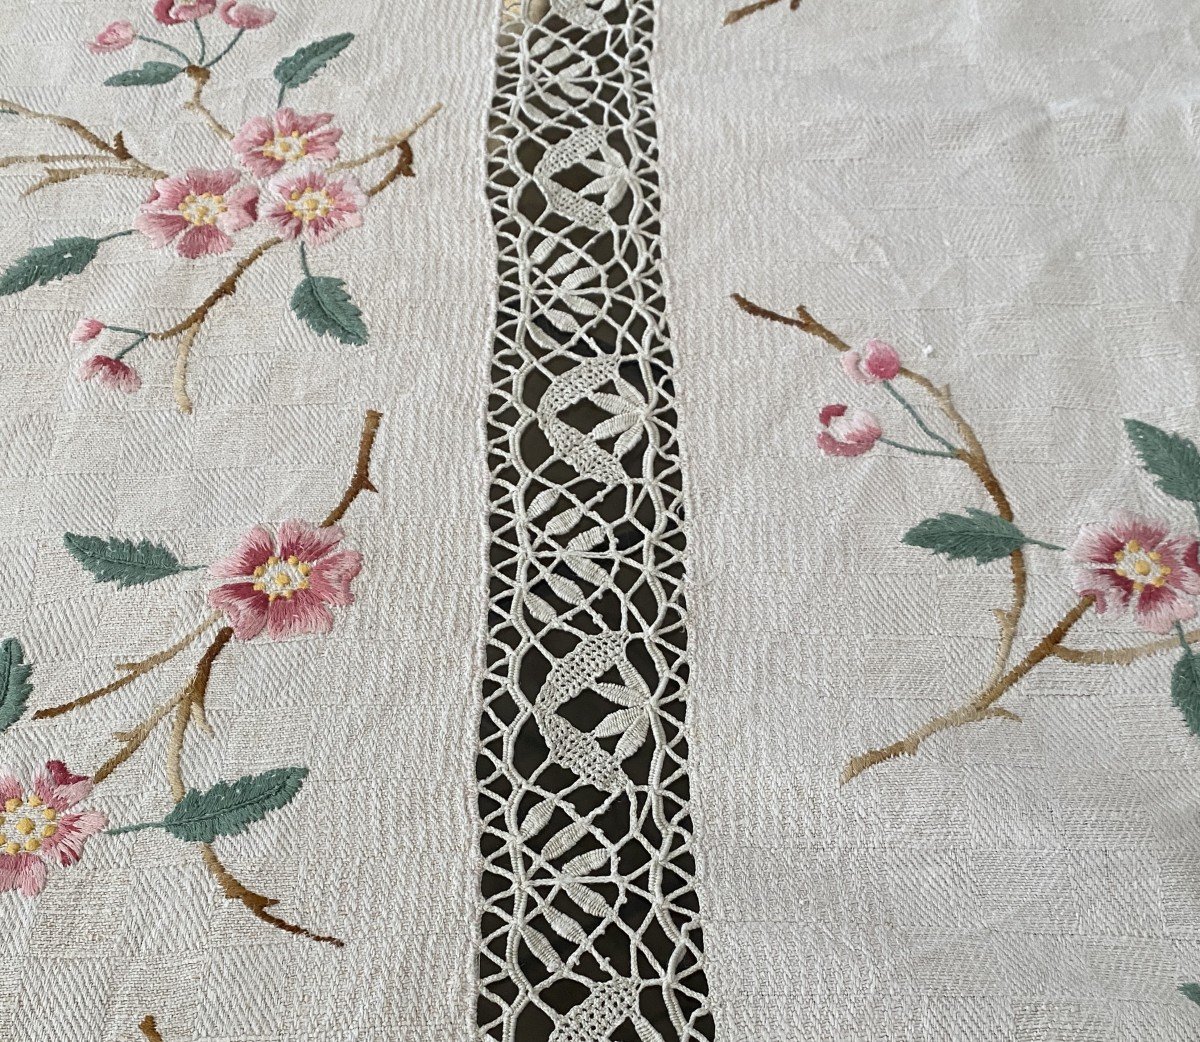 Large Linen Tablecloth With Checkerboard Decor And Embroidered With 19th Century Flowers-photo-3